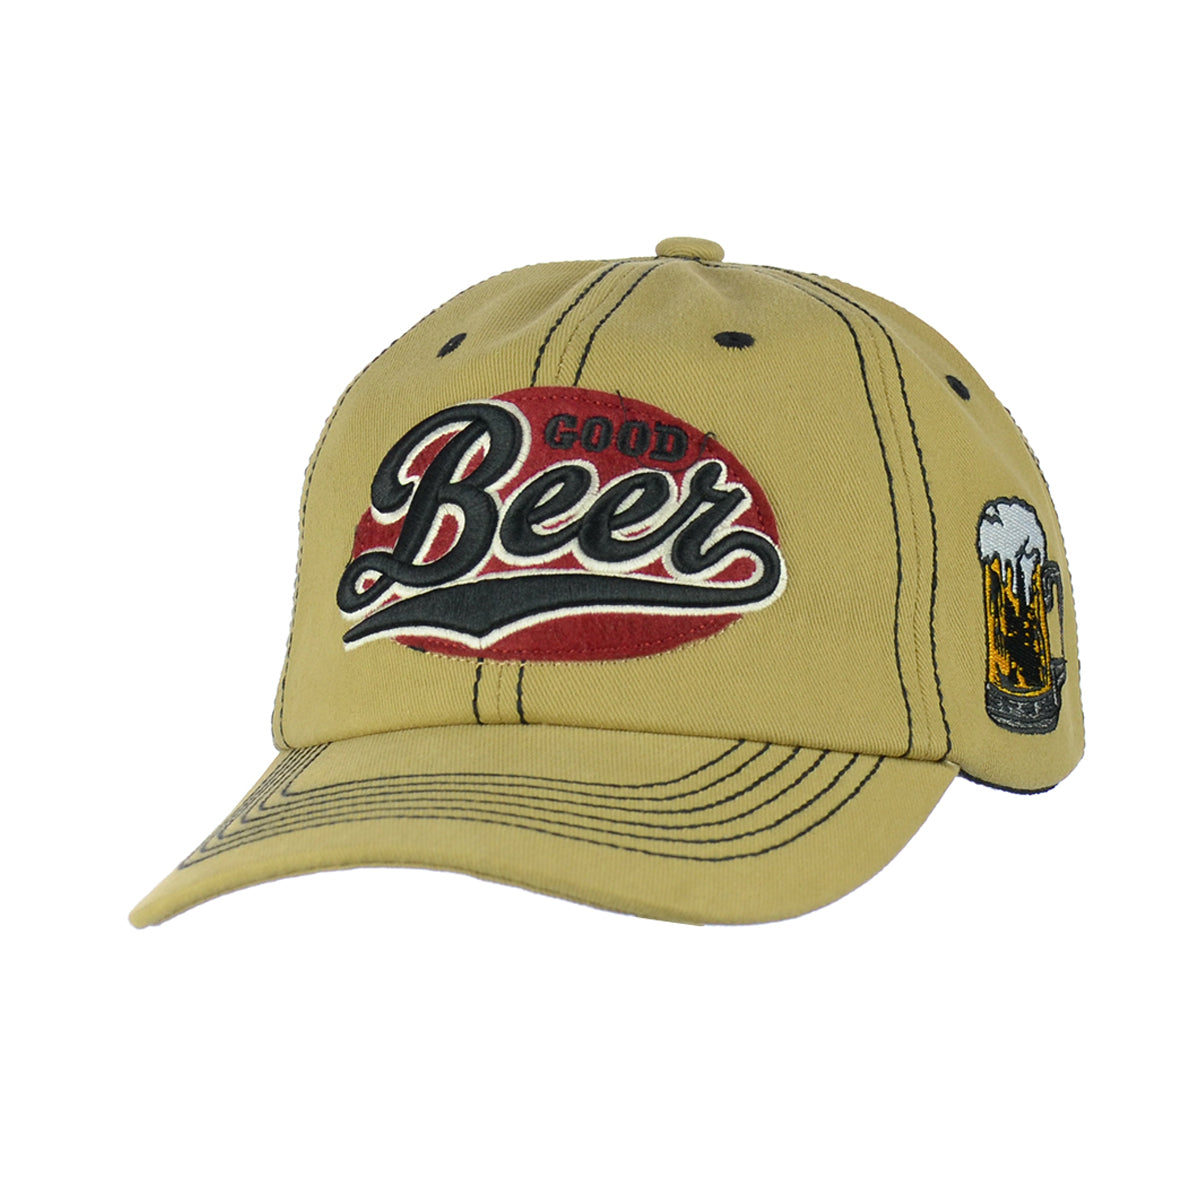 Good Beer Embroidered Snapback Hat